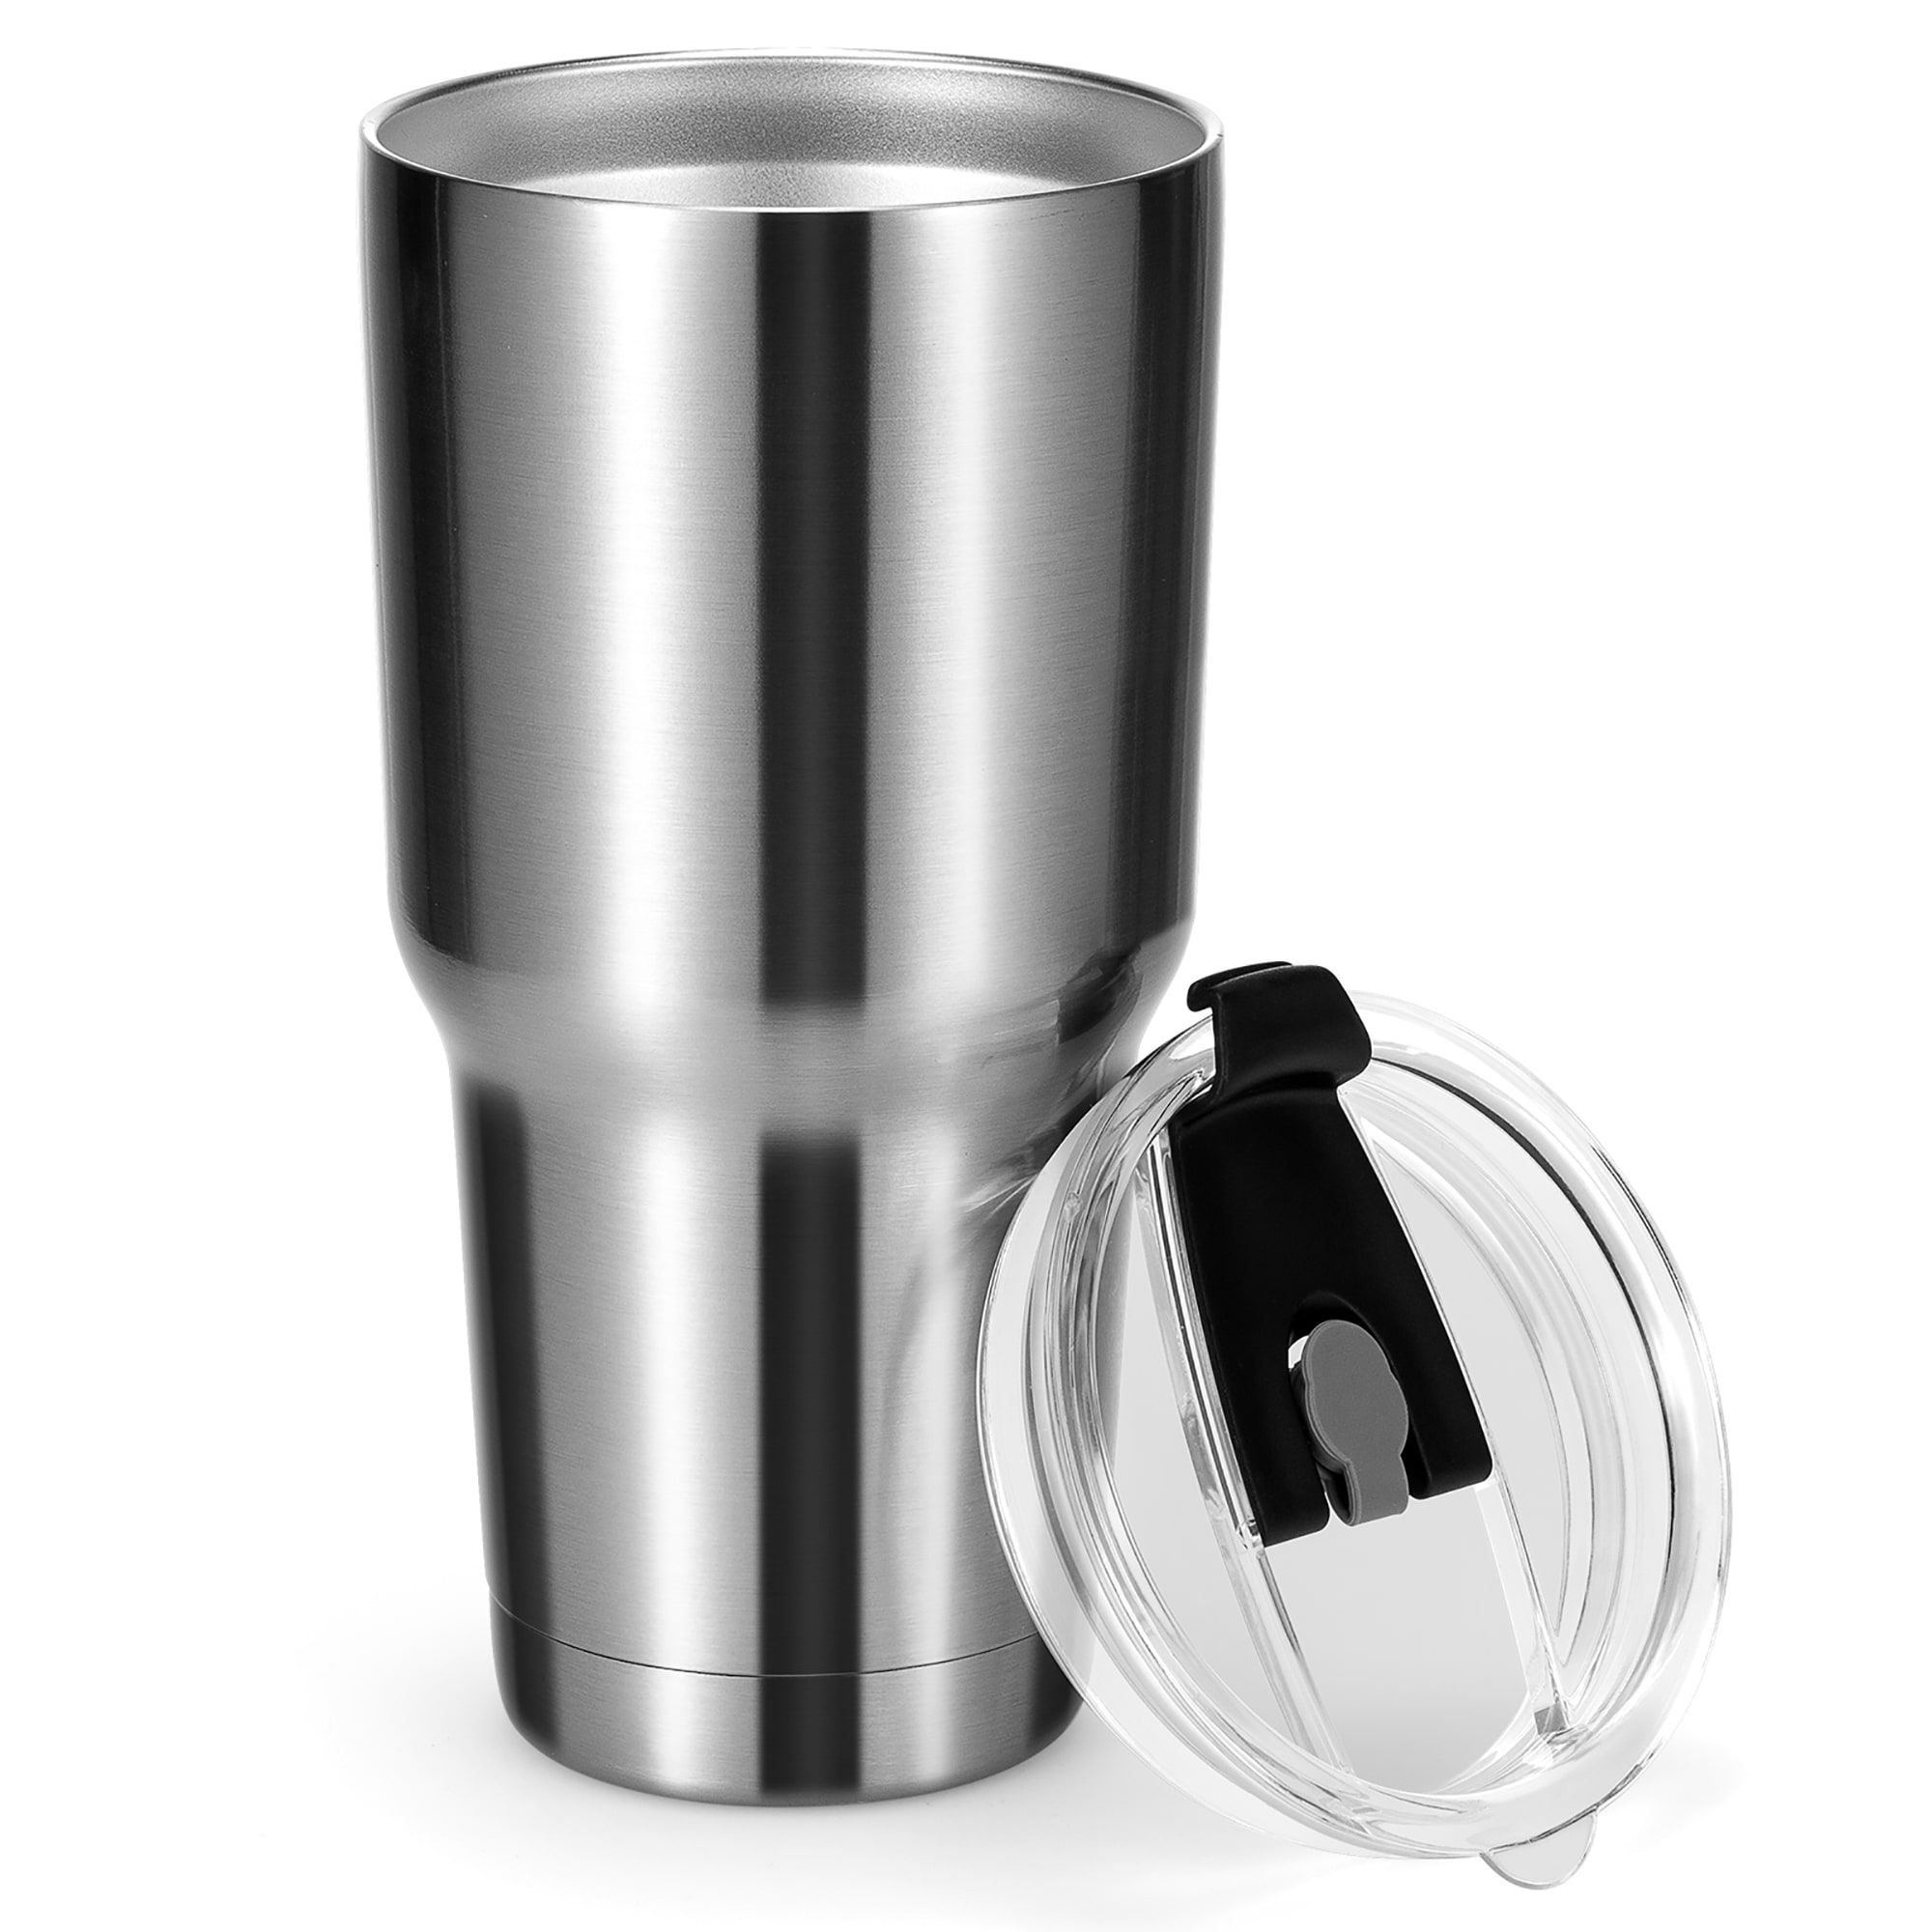 https://ak1.ostkcdn.com/images/products/is/images/direct/b0026e39ba69c303d0c1fbdbe4c9f8aea33c2271/Costway-30oz-Stainless-Steel-Tumbler-Cup-Double-Wall-Vacuum-Insulated.jpg